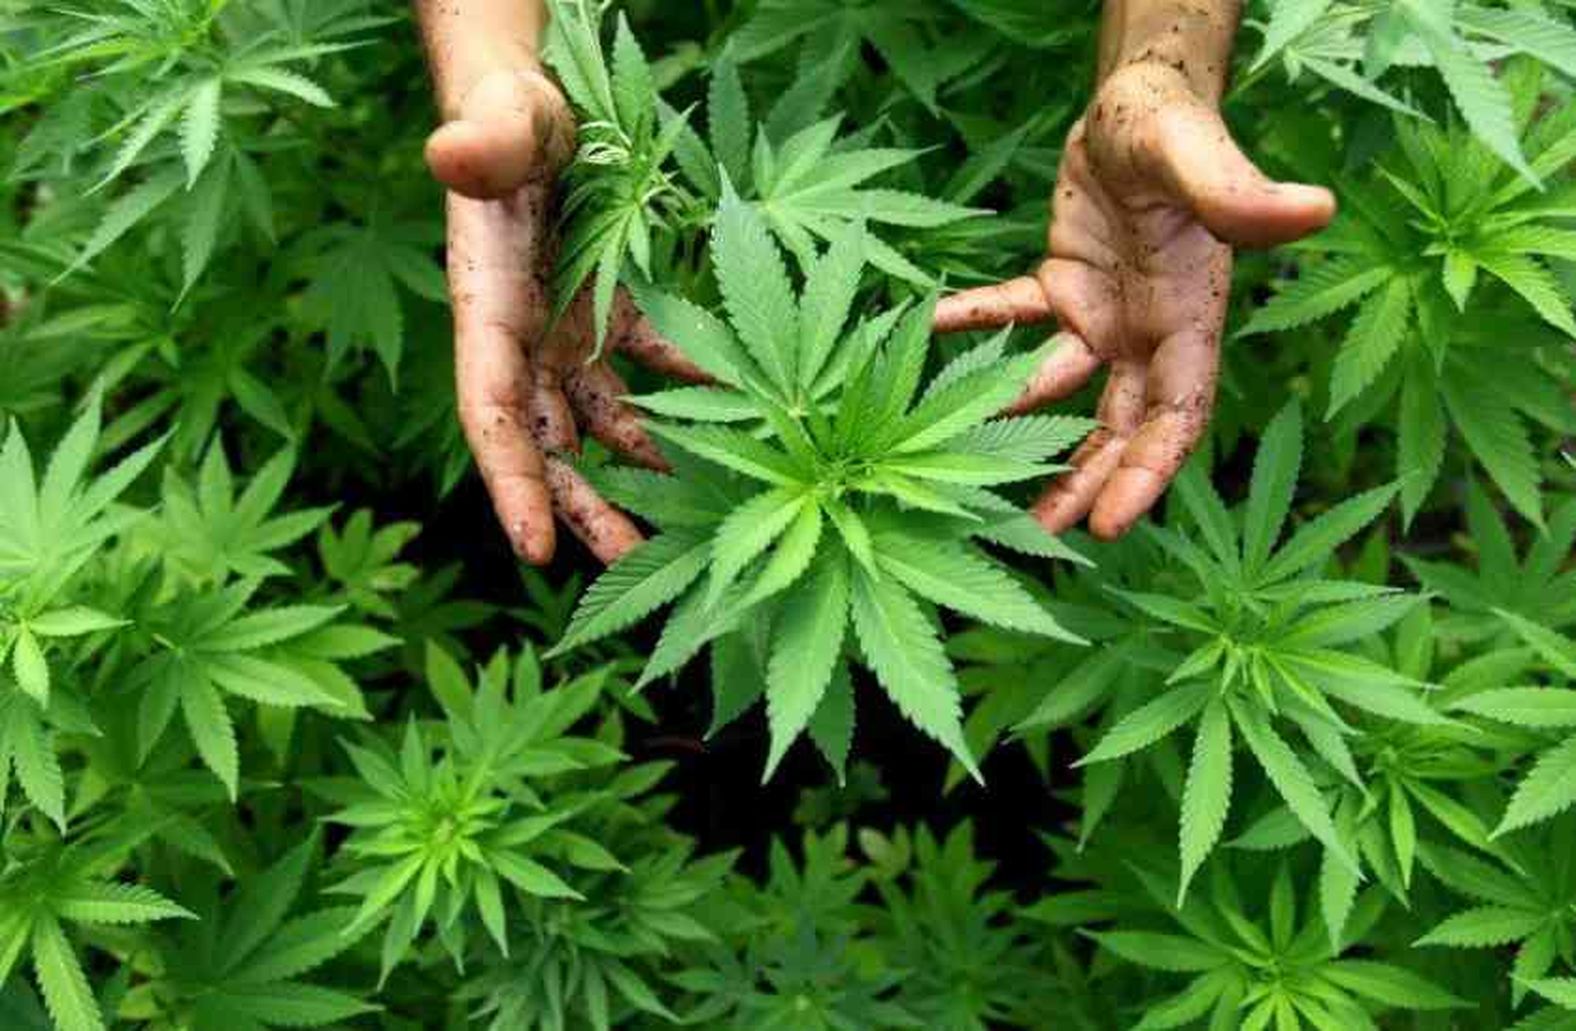 Hemp cultivation in looted forest between mountains, 40 lakh green plants seized